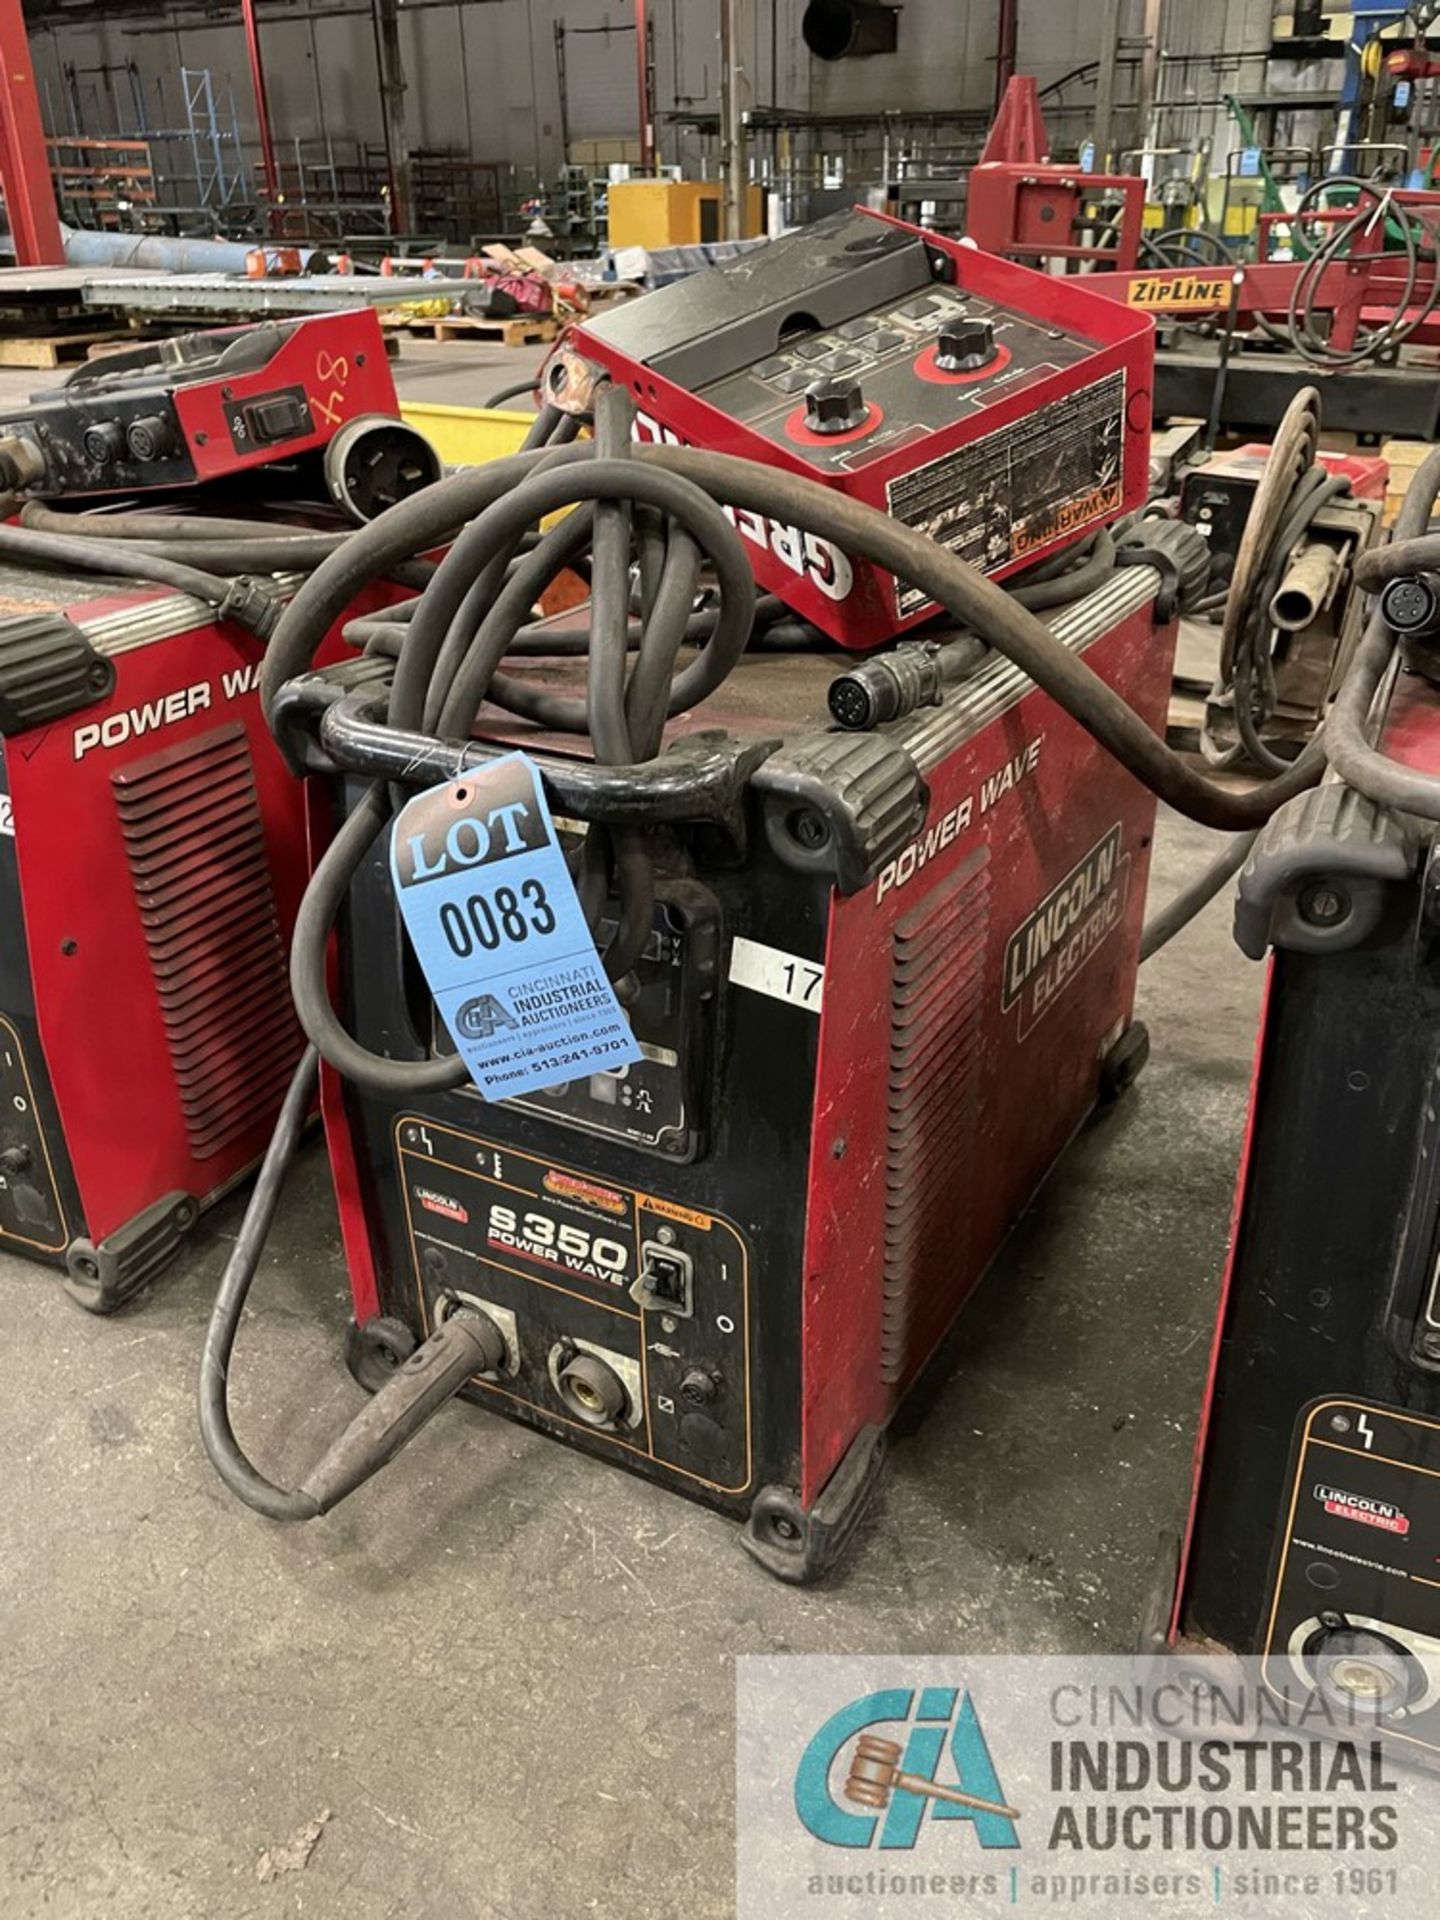 350 AMP LINCOLN S350 POWER WAVE ADVANCED PROCESS WELDER S/N U1130706852, WITH POWER FEED